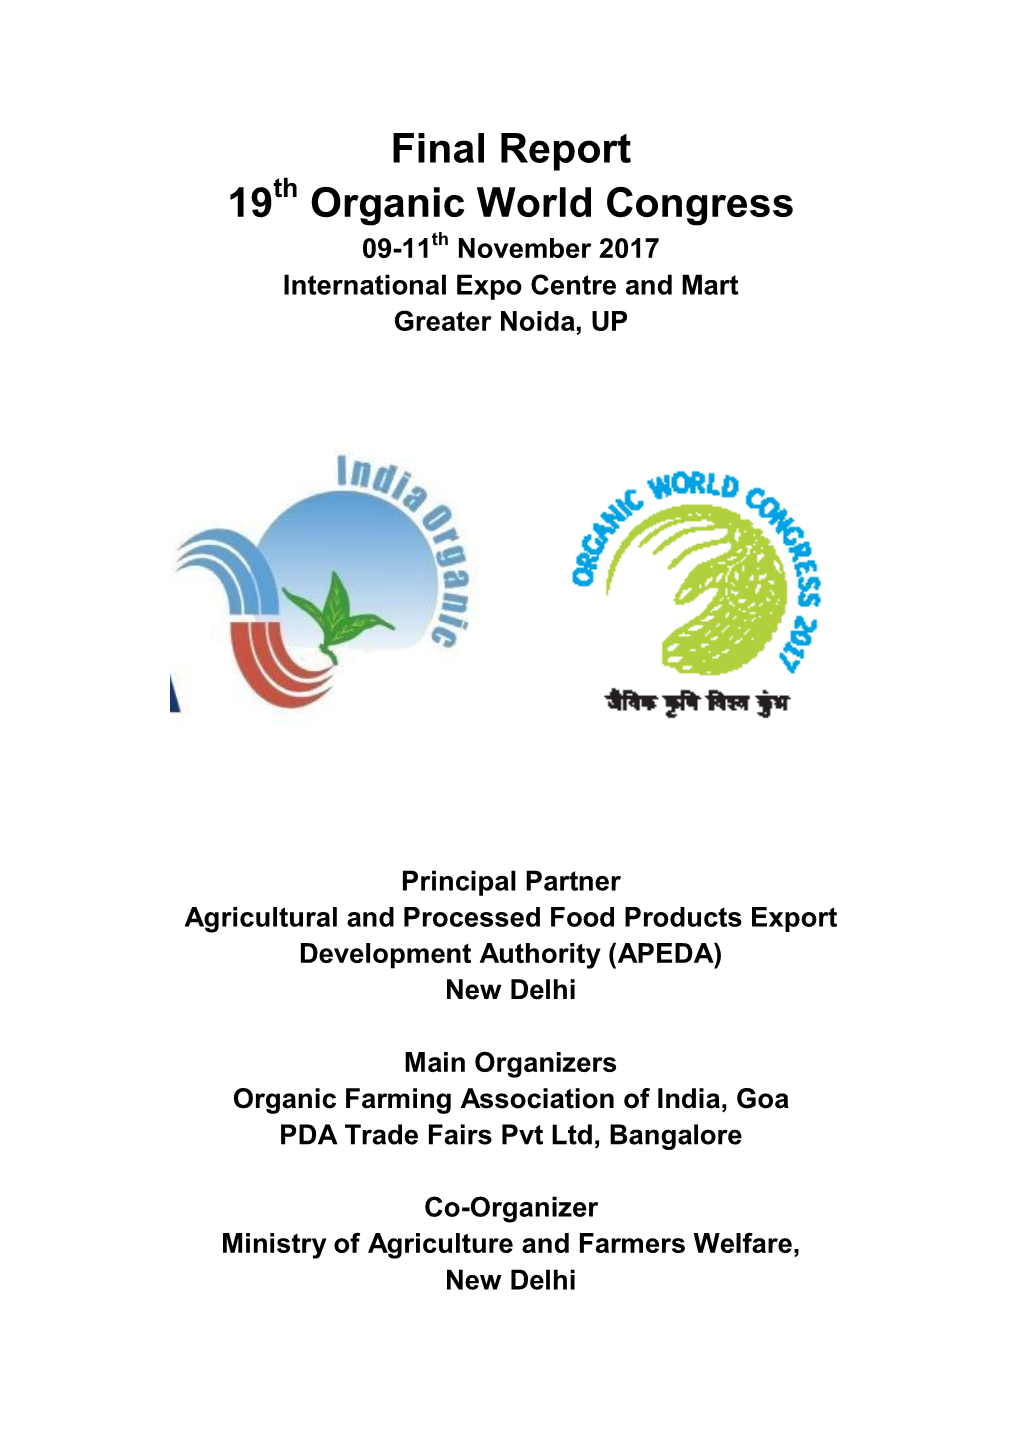 Final Report 19Th Organic World Congress 09-11Th November 2017 International Expo Centre and Mart Greater Noida, UP